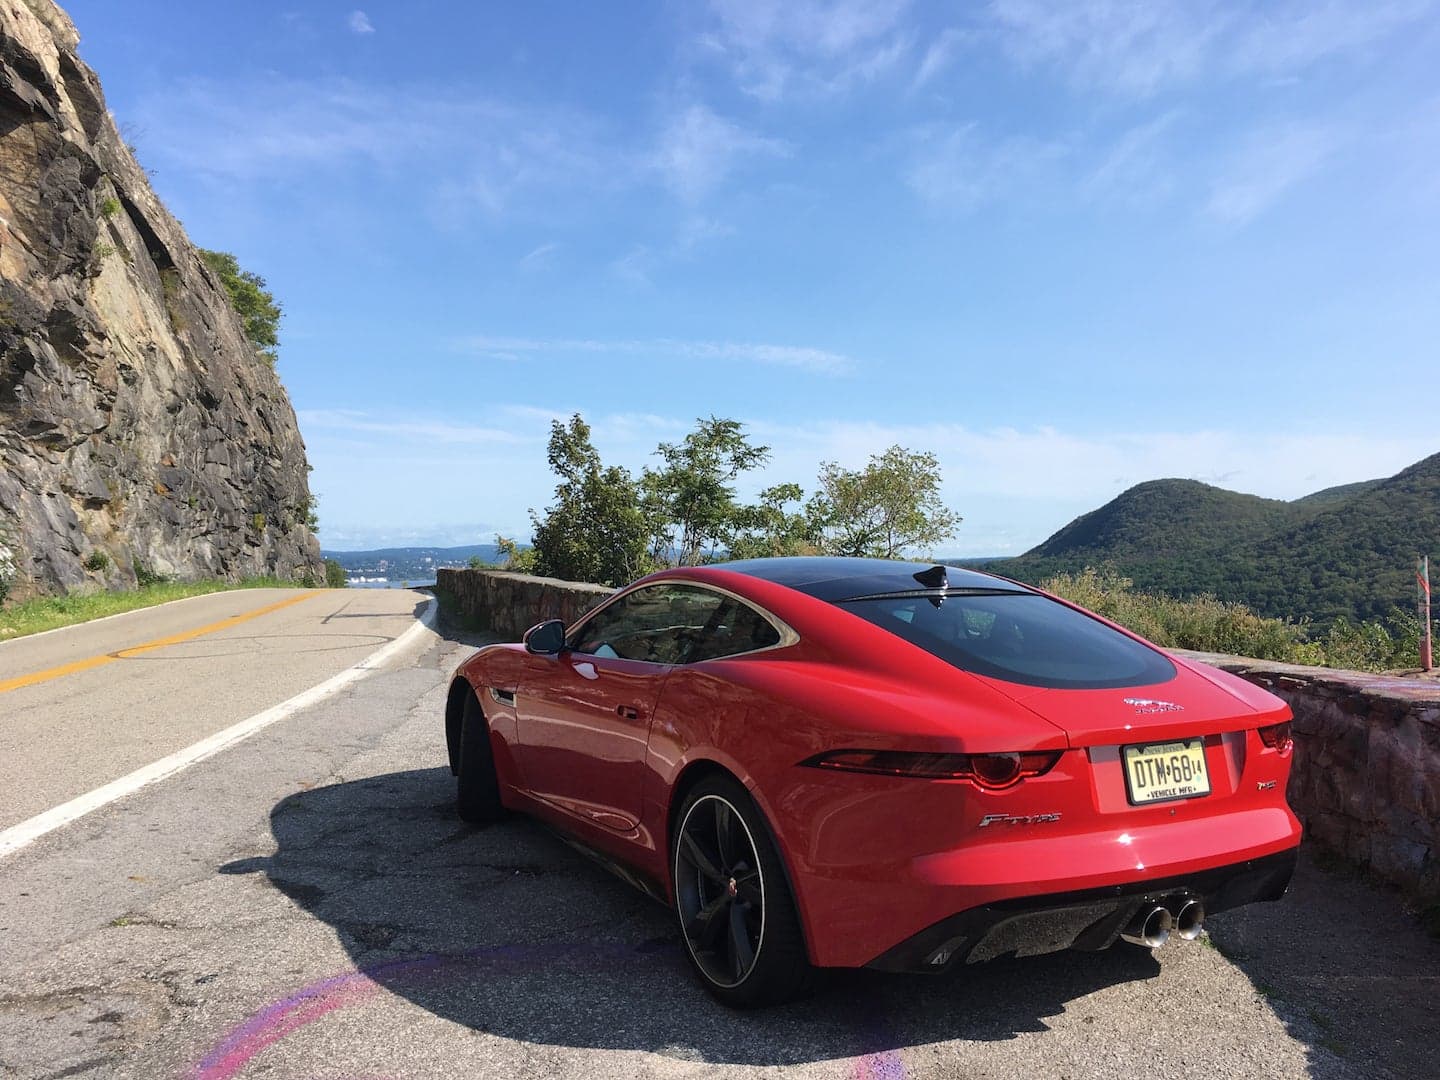 A 2018 Jaguar F-TYPE, a Few Free Hours, and a Perfect Road: This Is Why We Do This